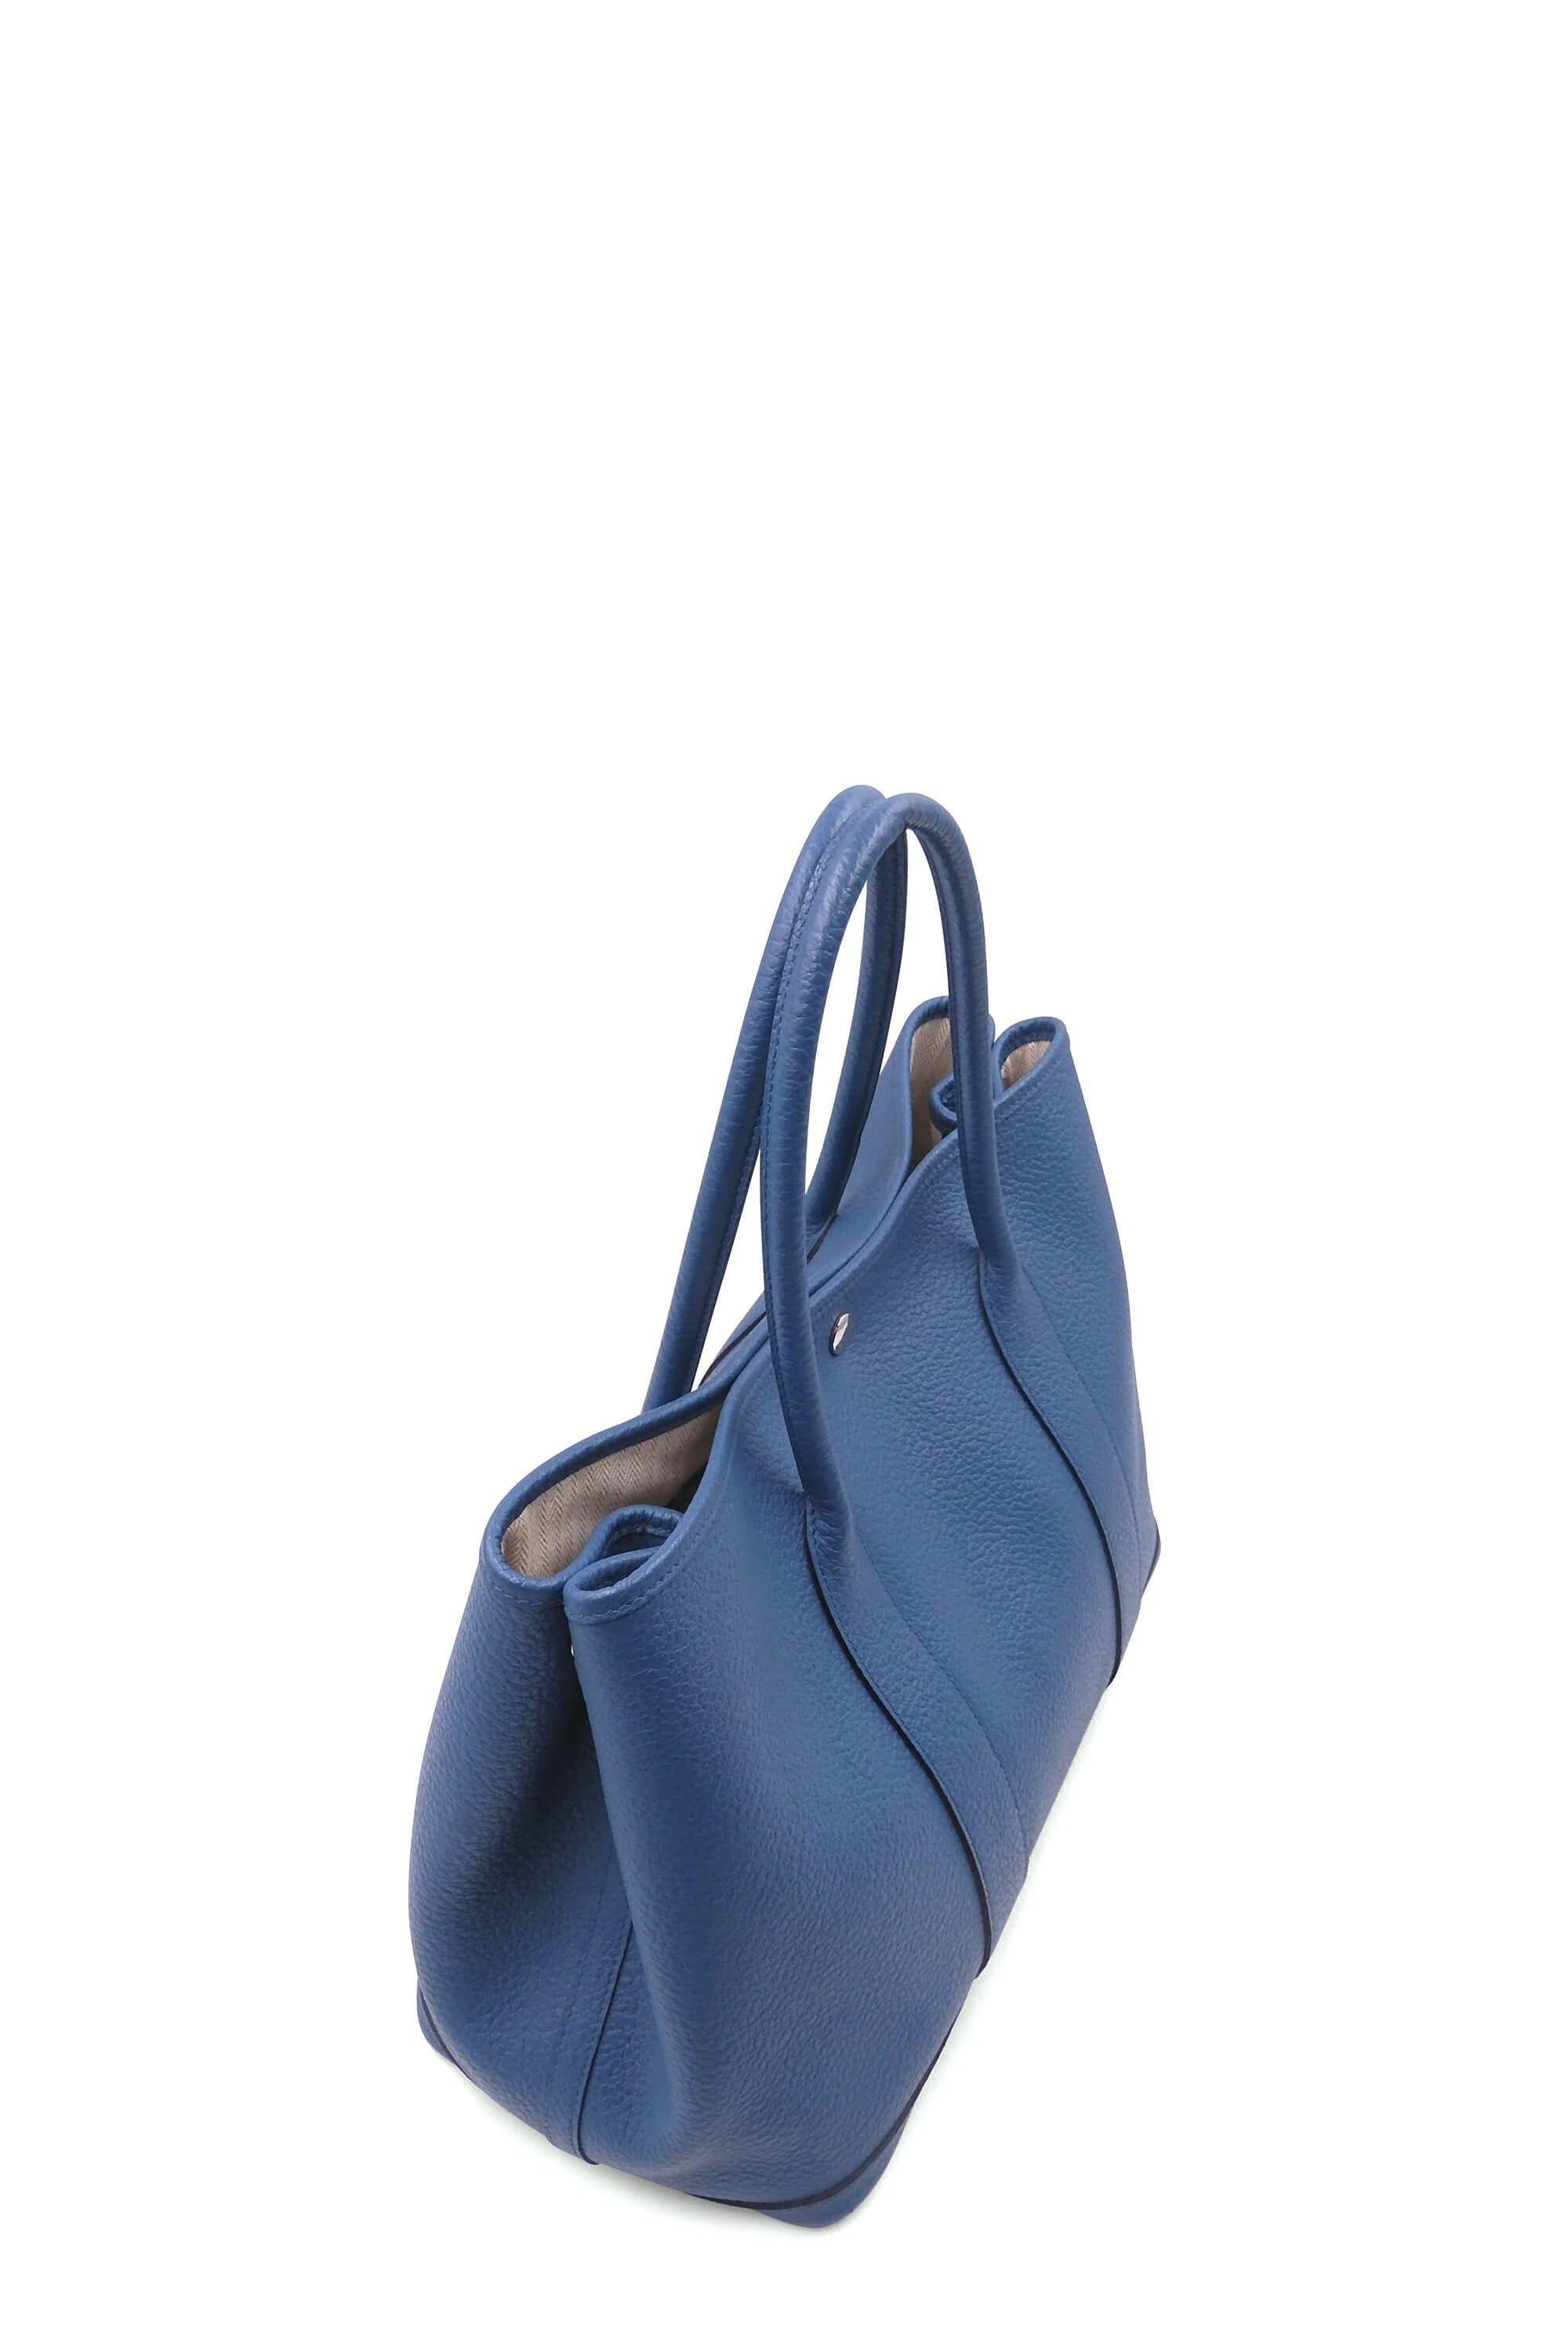 Buy Authentic, Preloved Hermes Garden Party 36 Blue Bags from